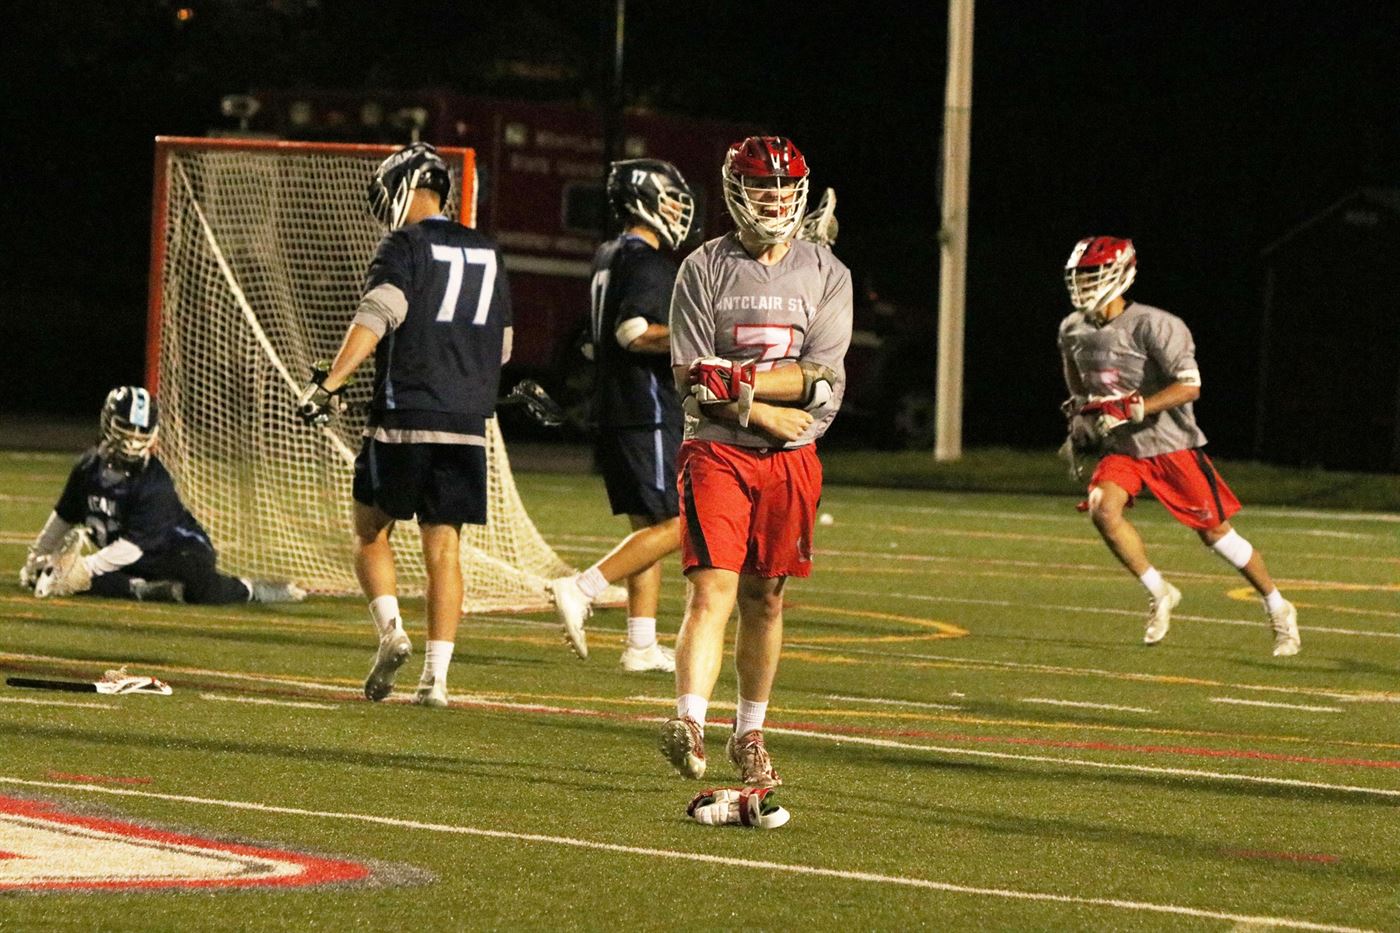 Christian Boyle (pictured) score four goals for the Red Hawks, the most for the team against Kean. Trevor Giesberg | The Montclarion